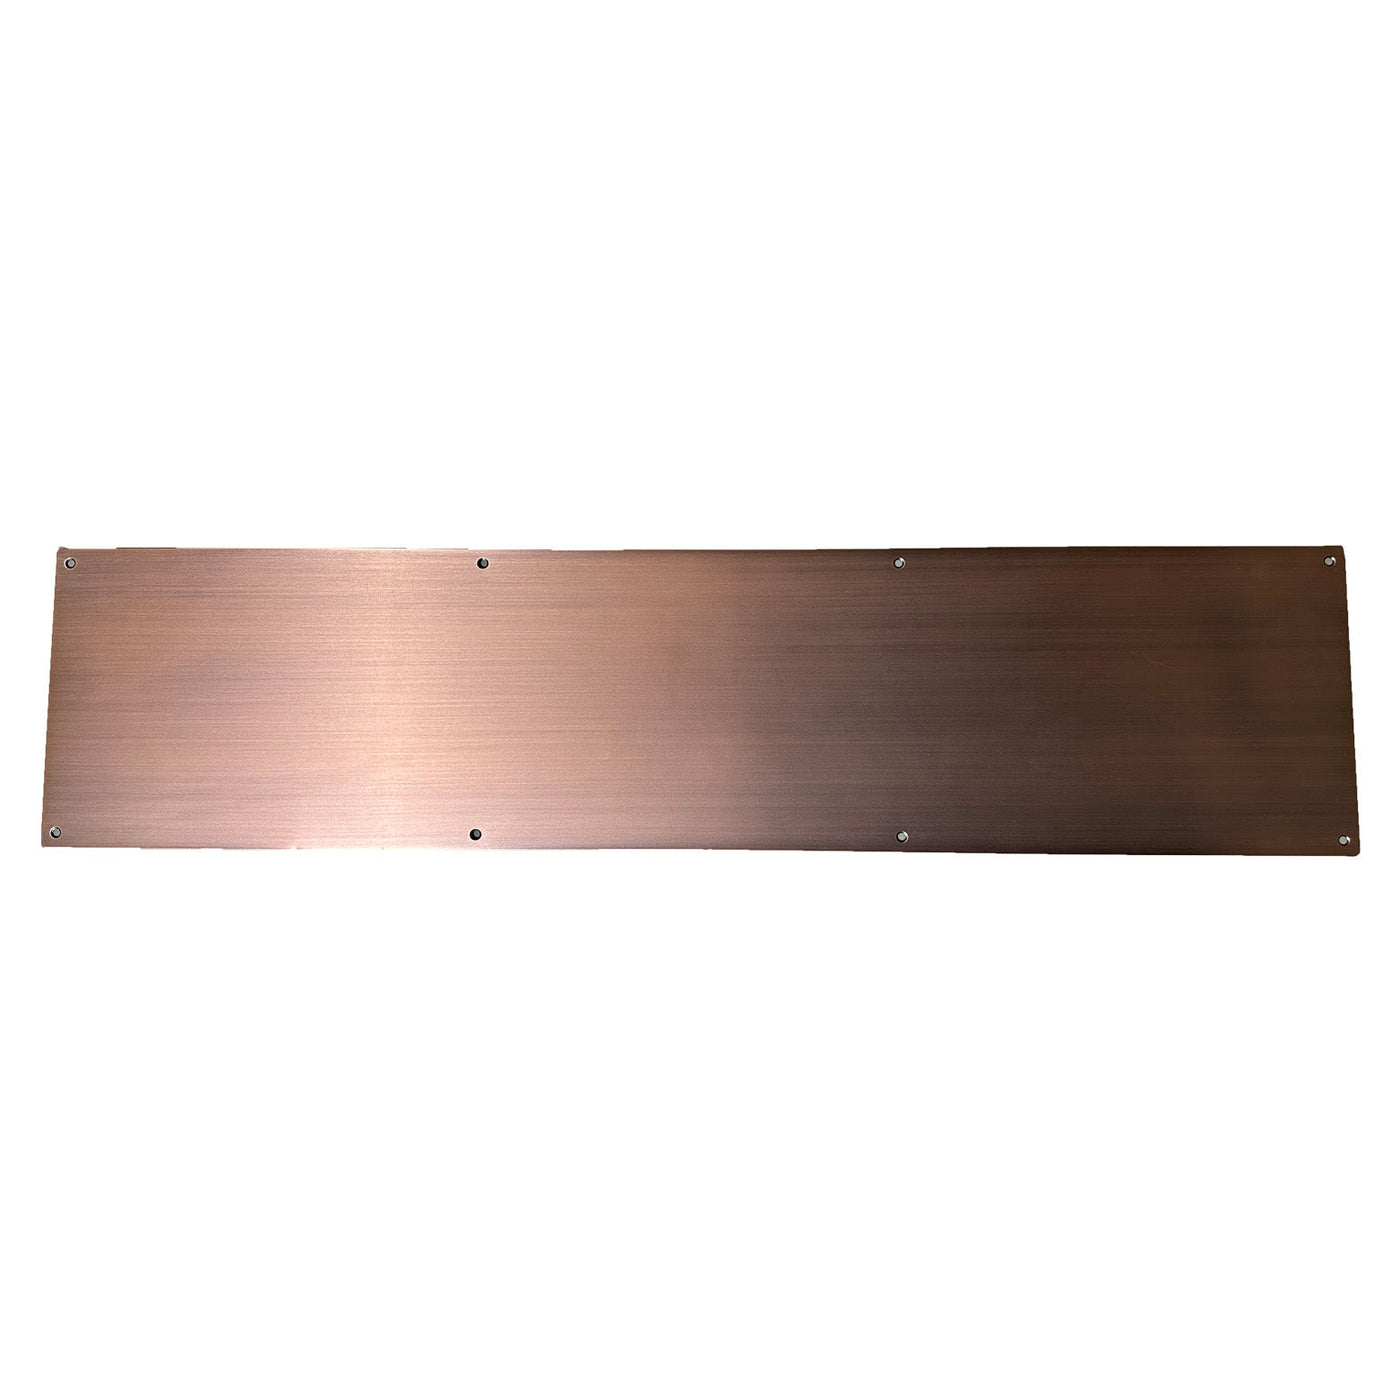 8 Inch x 34 Inch Stainless Steel Kick Plate (Antique Copper Finish)